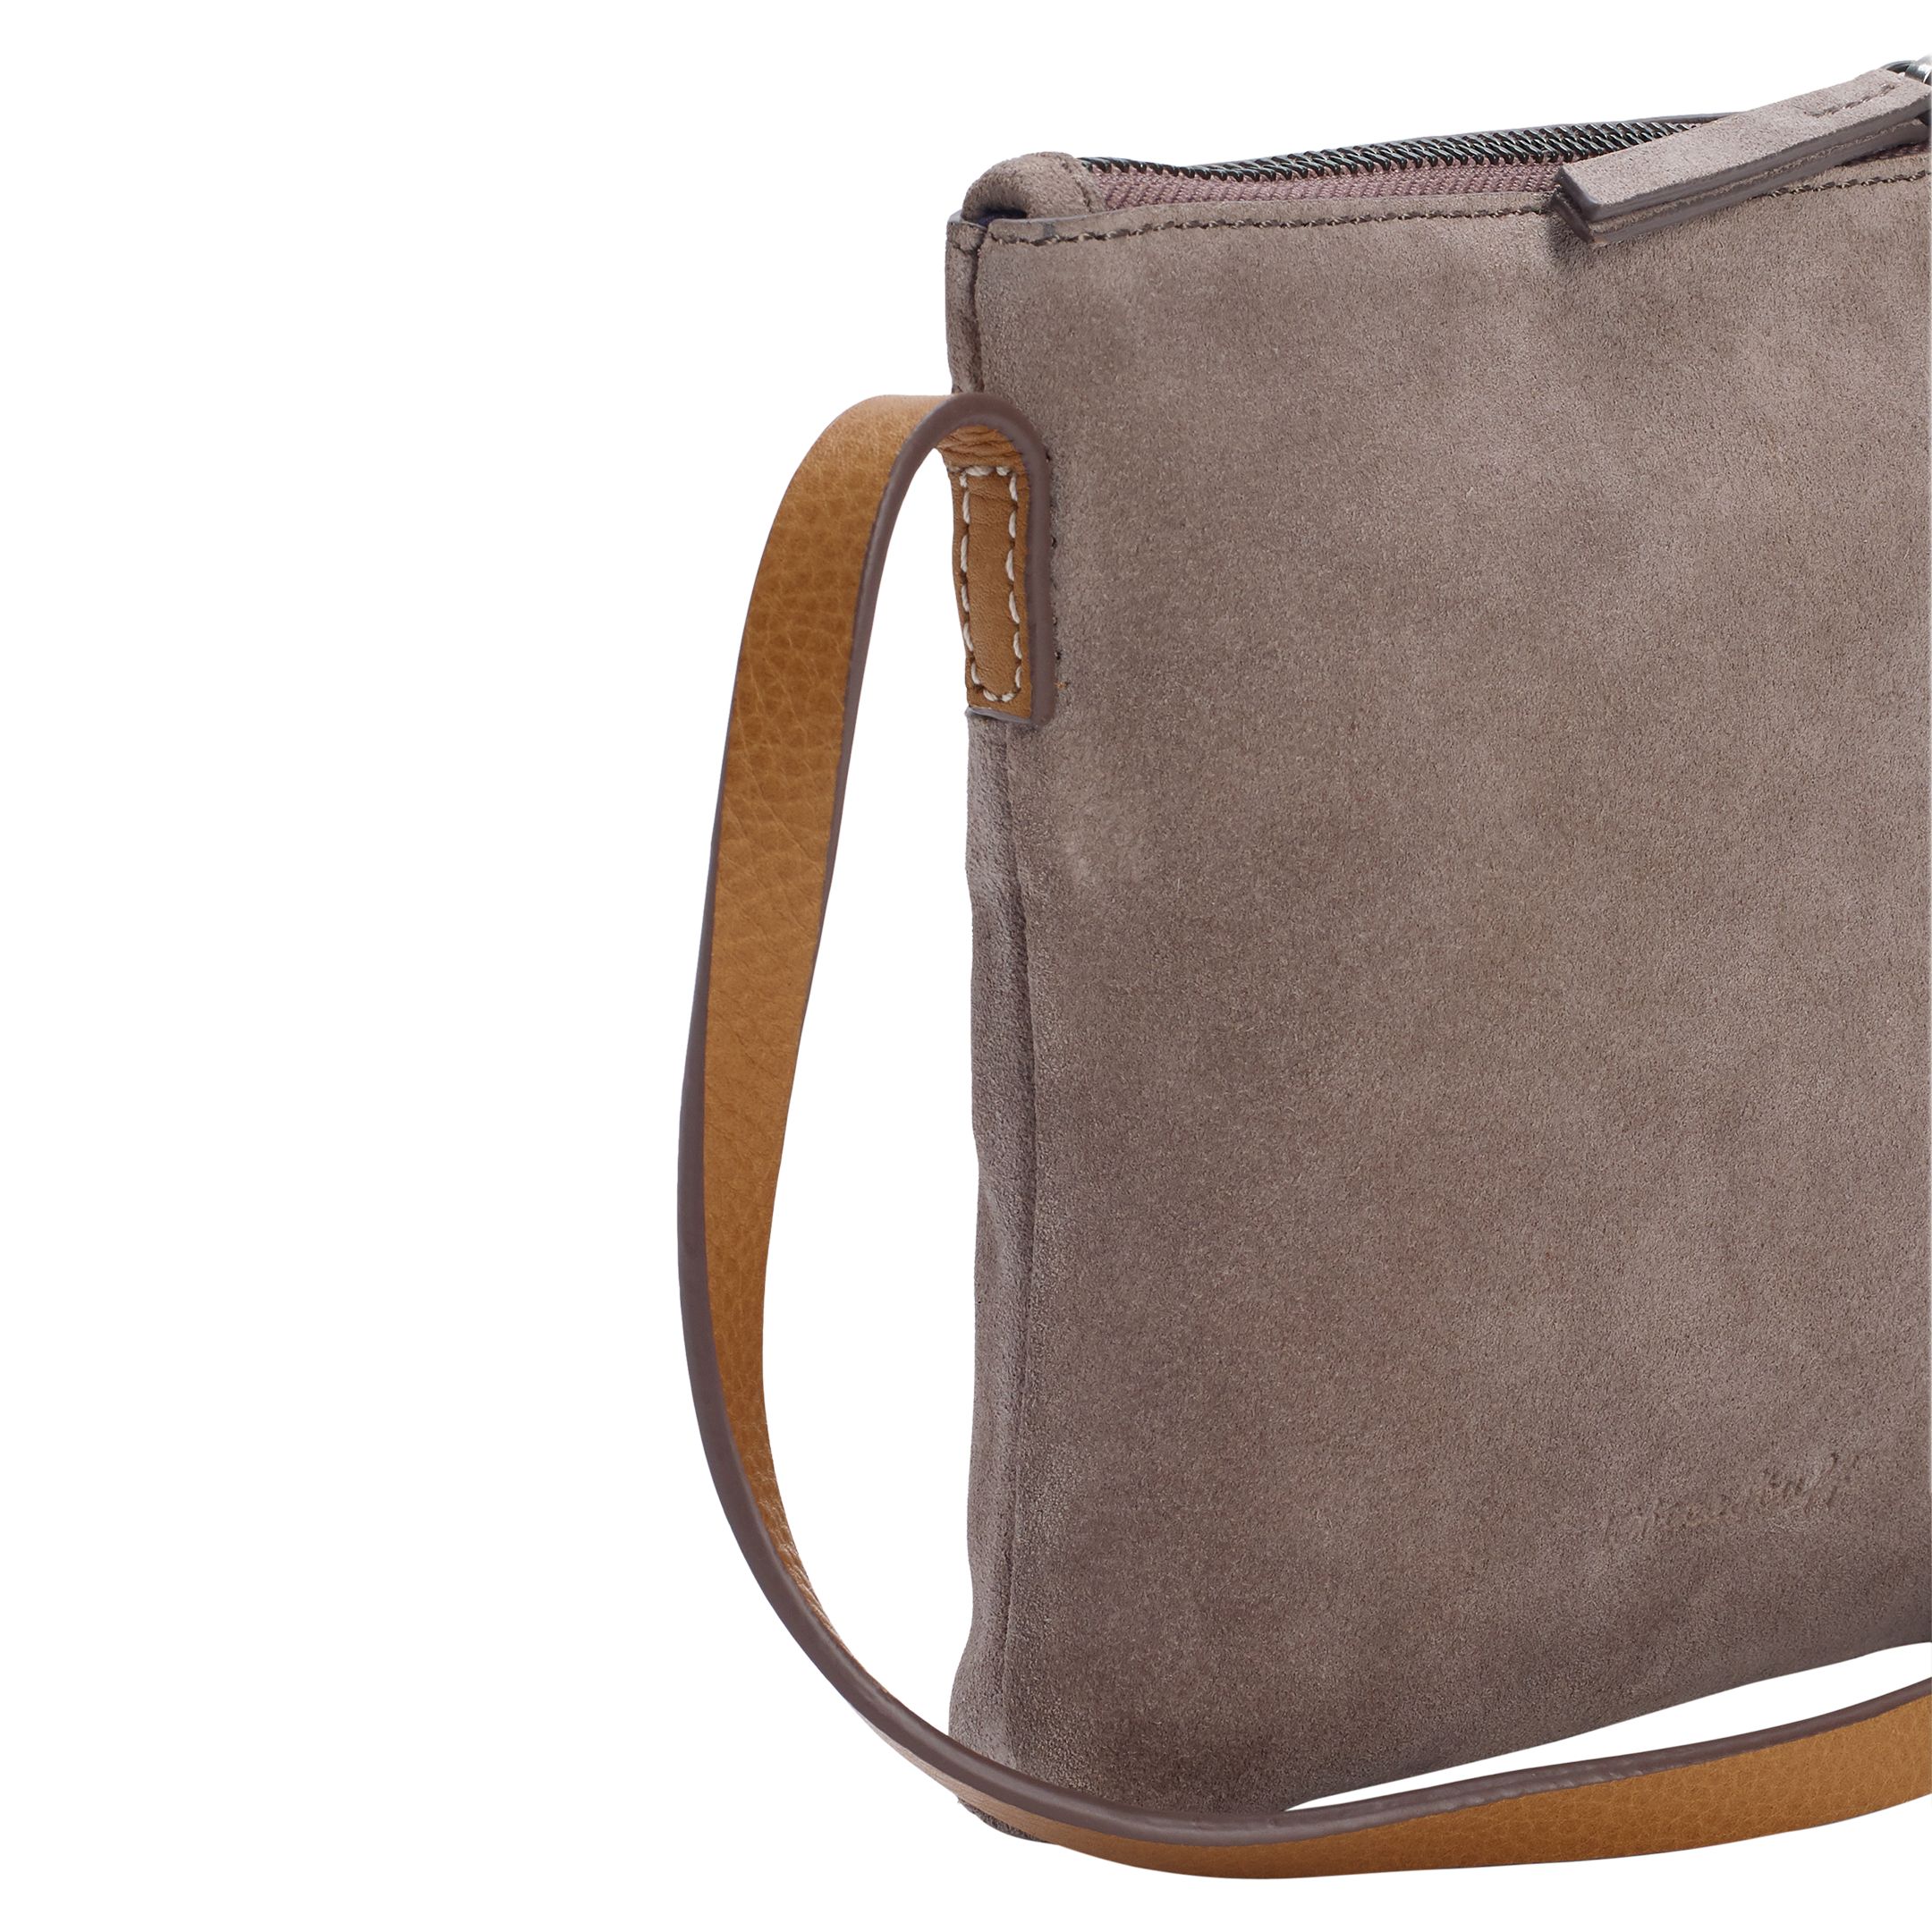 White Stuff Suede Cross Body Bag, Taupe at John Lewis & Partners